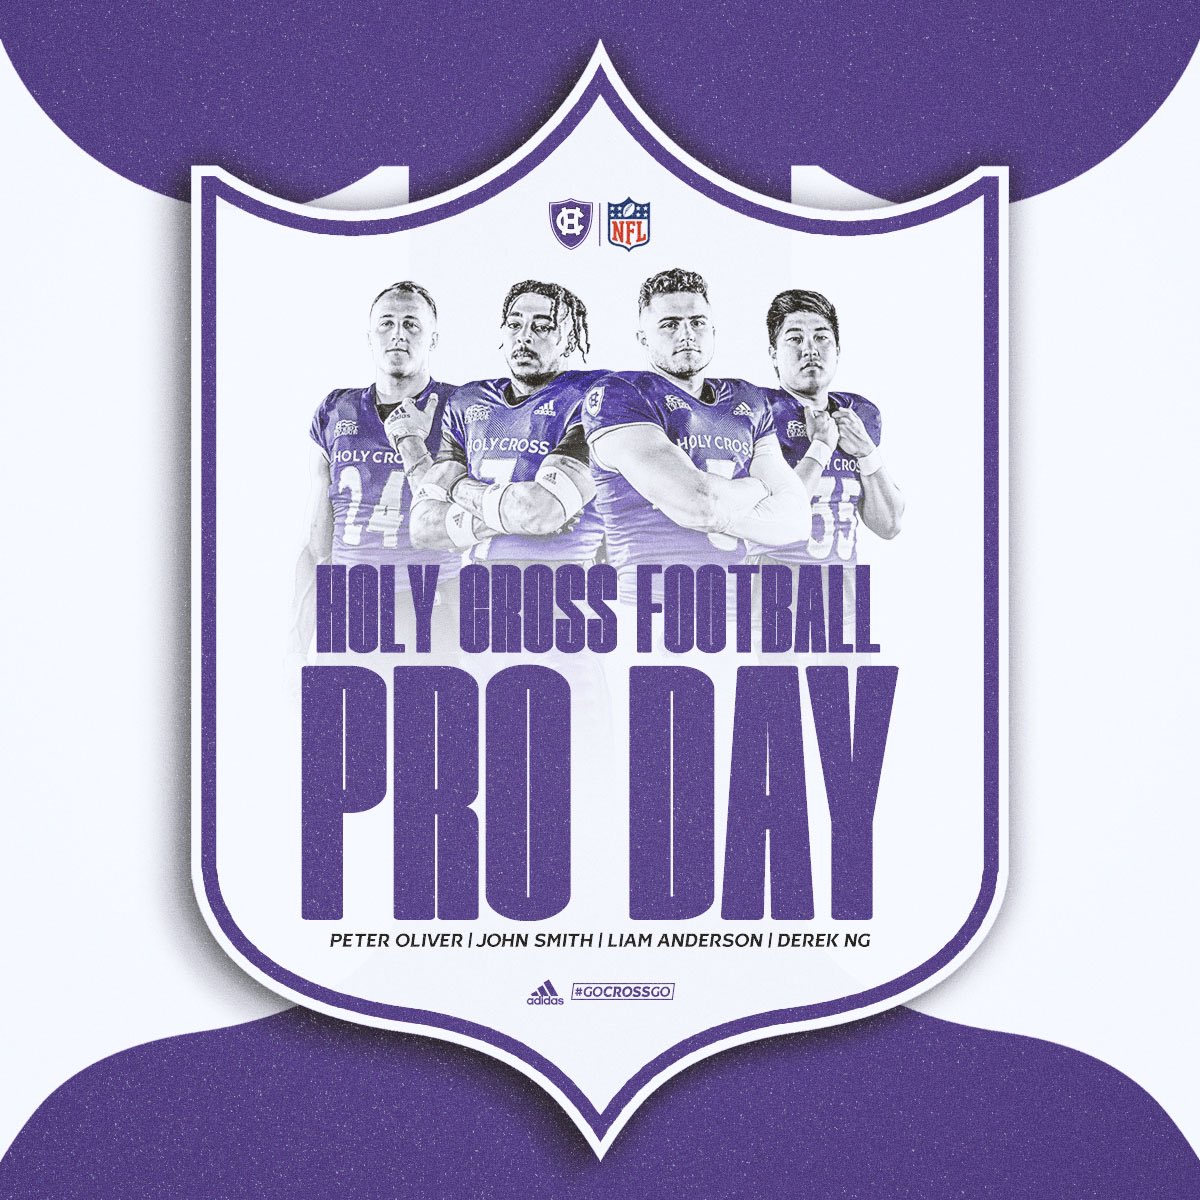 Our Pro Day is underway today! Proud of our guys and wishing them the best of luck 🫡 #GoCrossGo